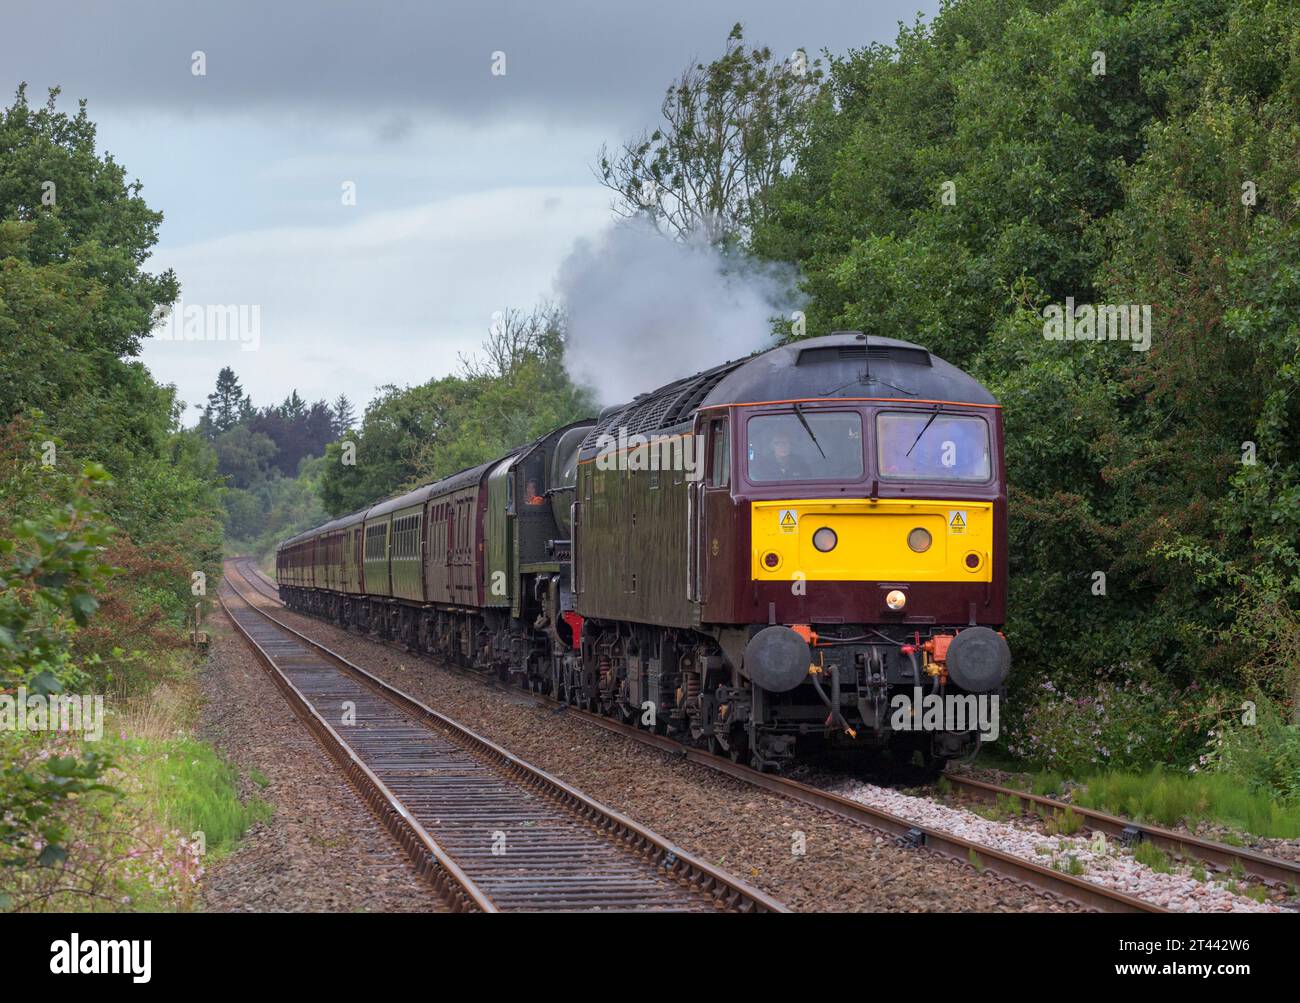 West Coast railway co class 47 locomotive on the little North western railway with empty charter train carriages with a steam engine near Melling Stock Photo